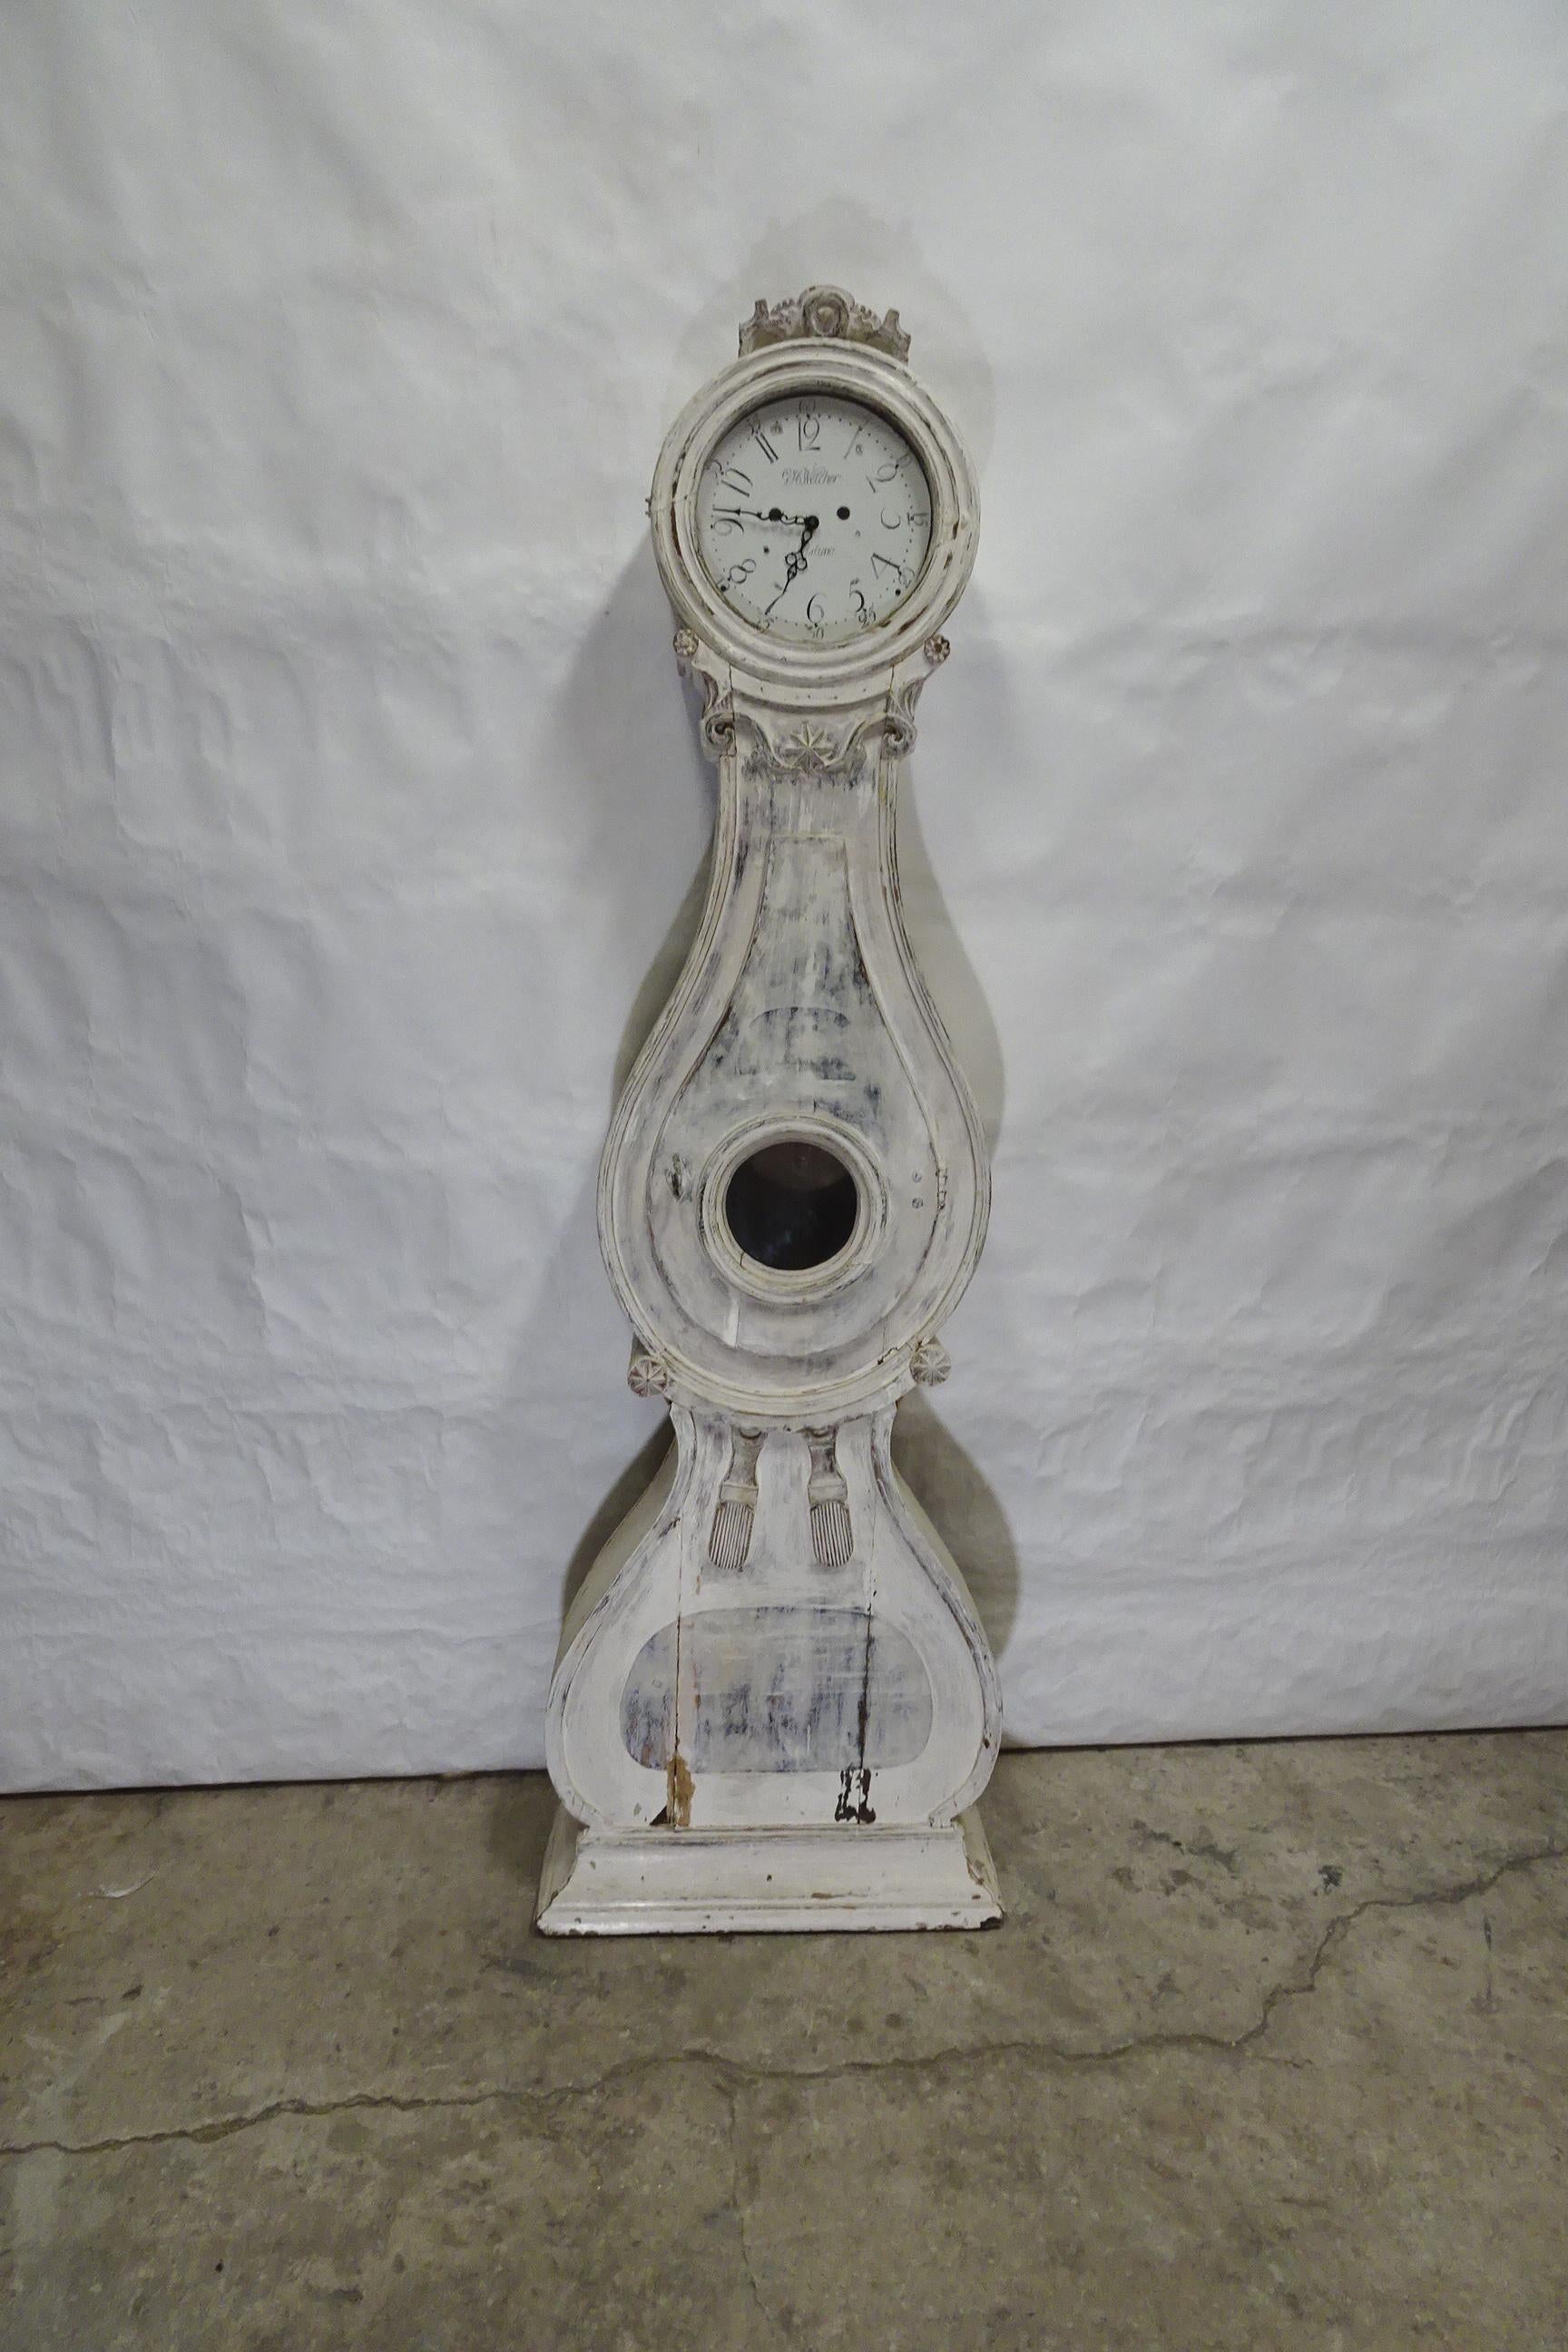 This is a Swedish Mora Clock 100% Original Paint Fryksdhal Model .
the old works have been removed and New battery works installed. I do offer the Original works with every clock I sell.